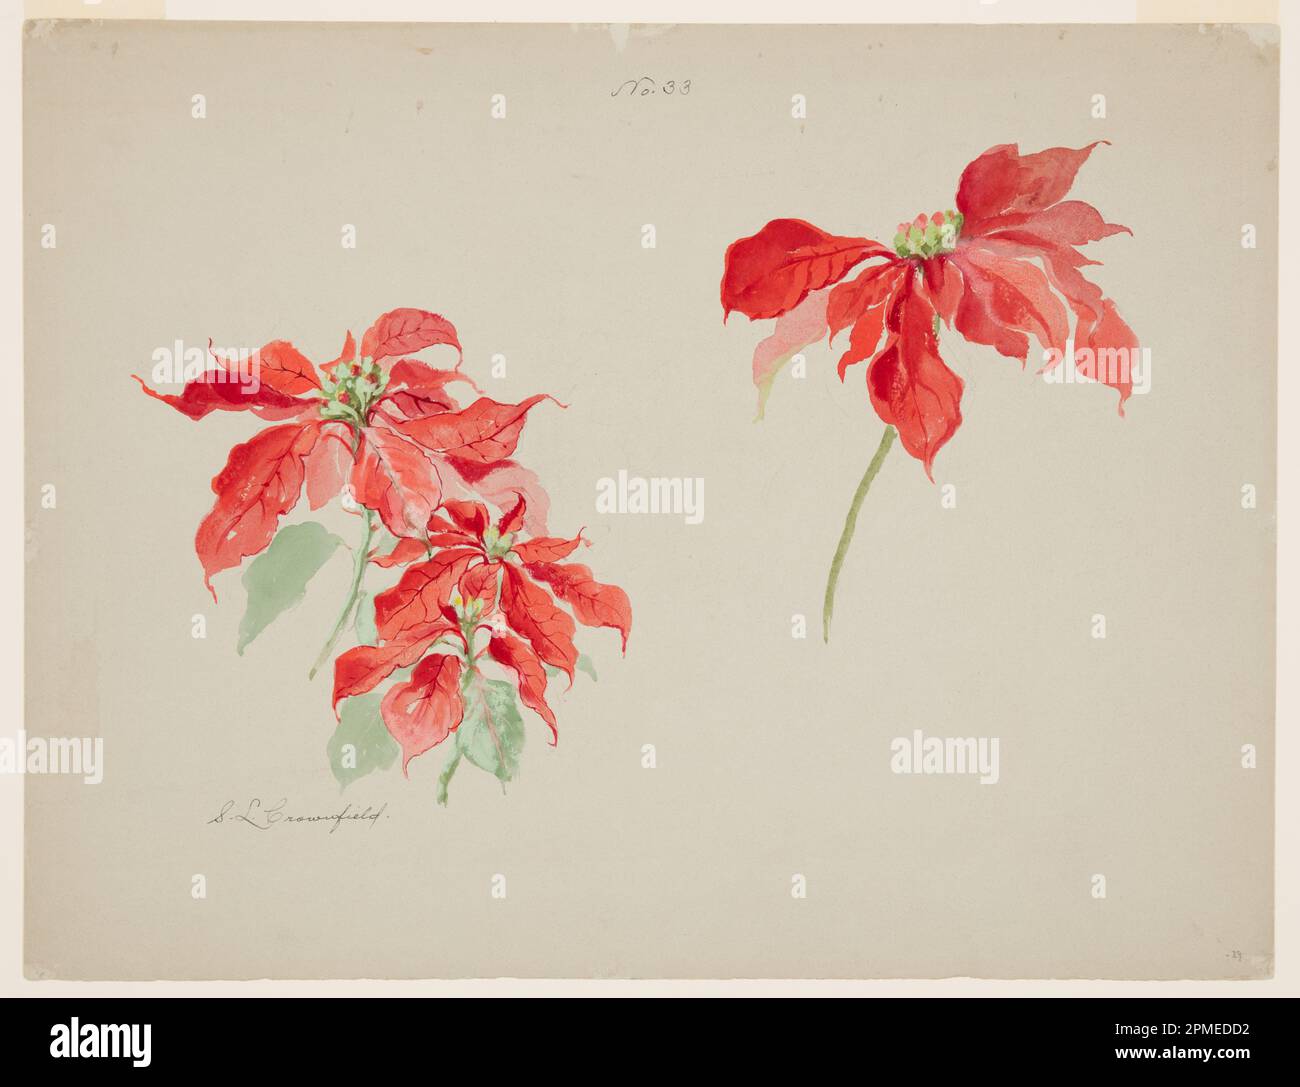 Drawing, Study of Red Poinsettias; Designed by Sophia L. Crownfield (American, 1862–1929); USA; brush and watercolor, graphite on gray paper; 43 × 56.5 cm (16 15/16 × 22 1/4 in.) Mat: 55.9 × 71.1 cm (22 × 28 in.) Stock Photo